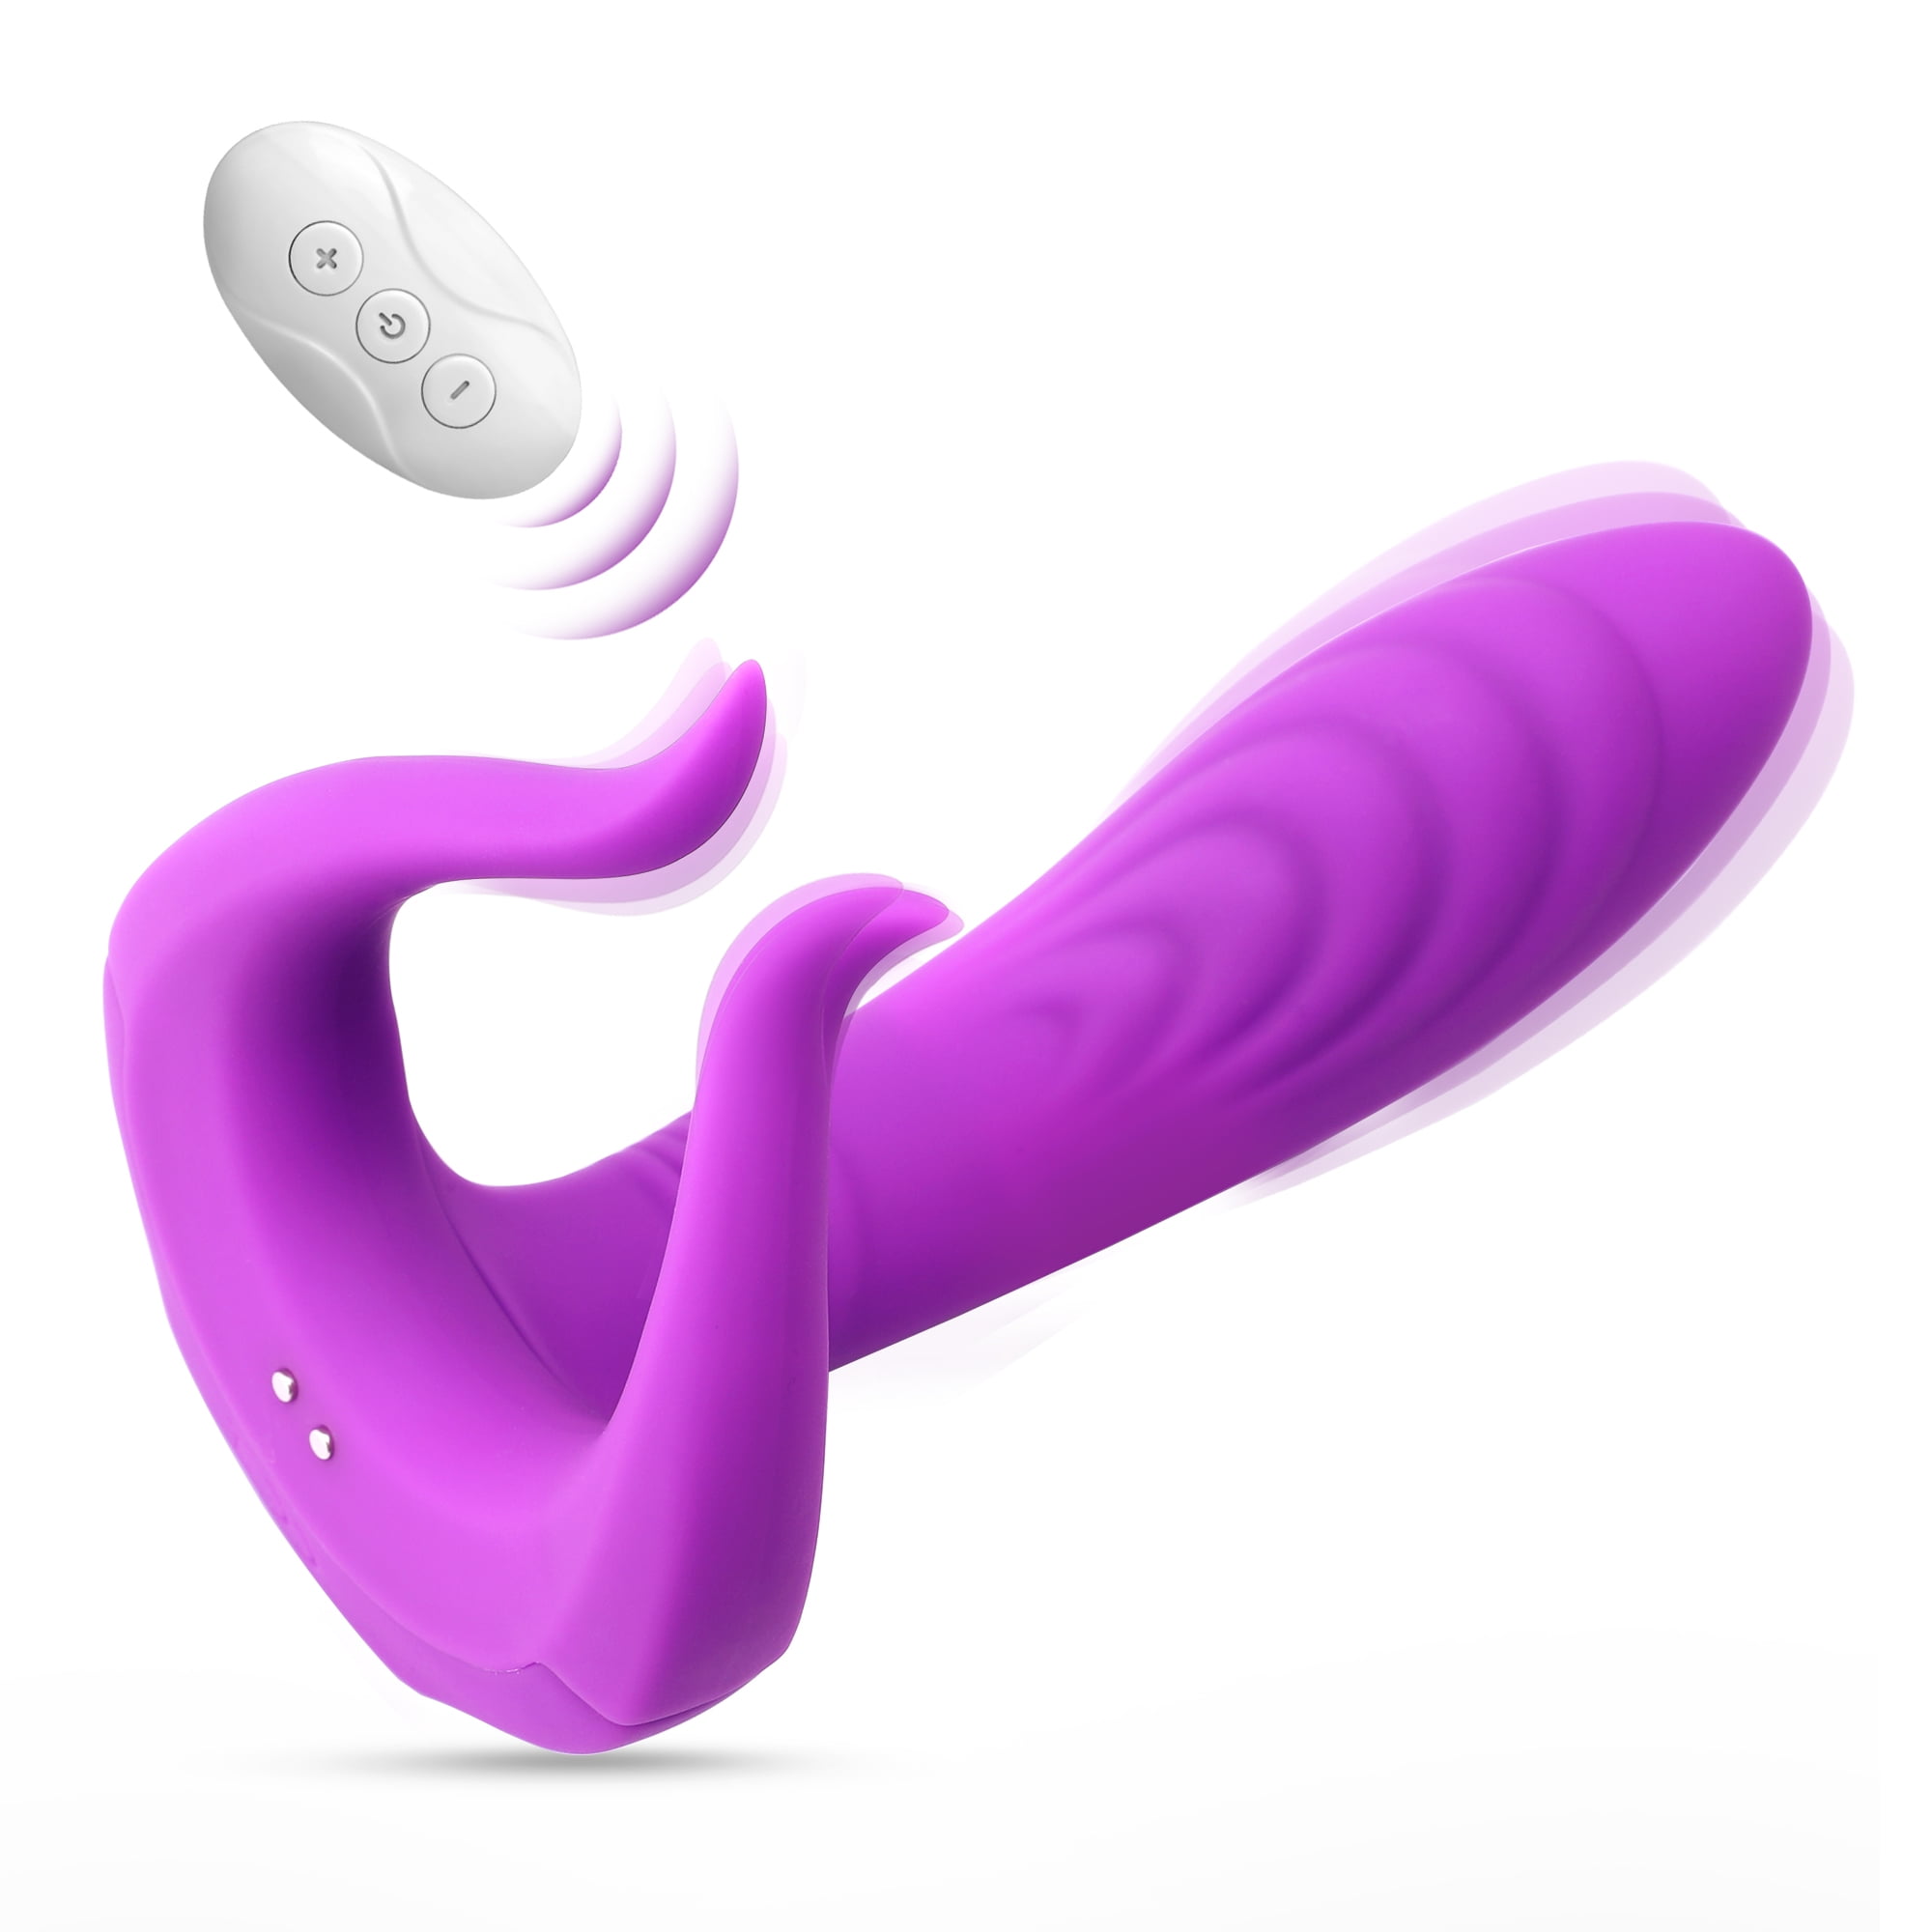 G-spot Dildo Vibrator with Remote Control, 3 IN 1 Nipple Clitoris Anal Stimulator with 10 Vibration Modes, Adult sex toys for Women, Men, Couple image